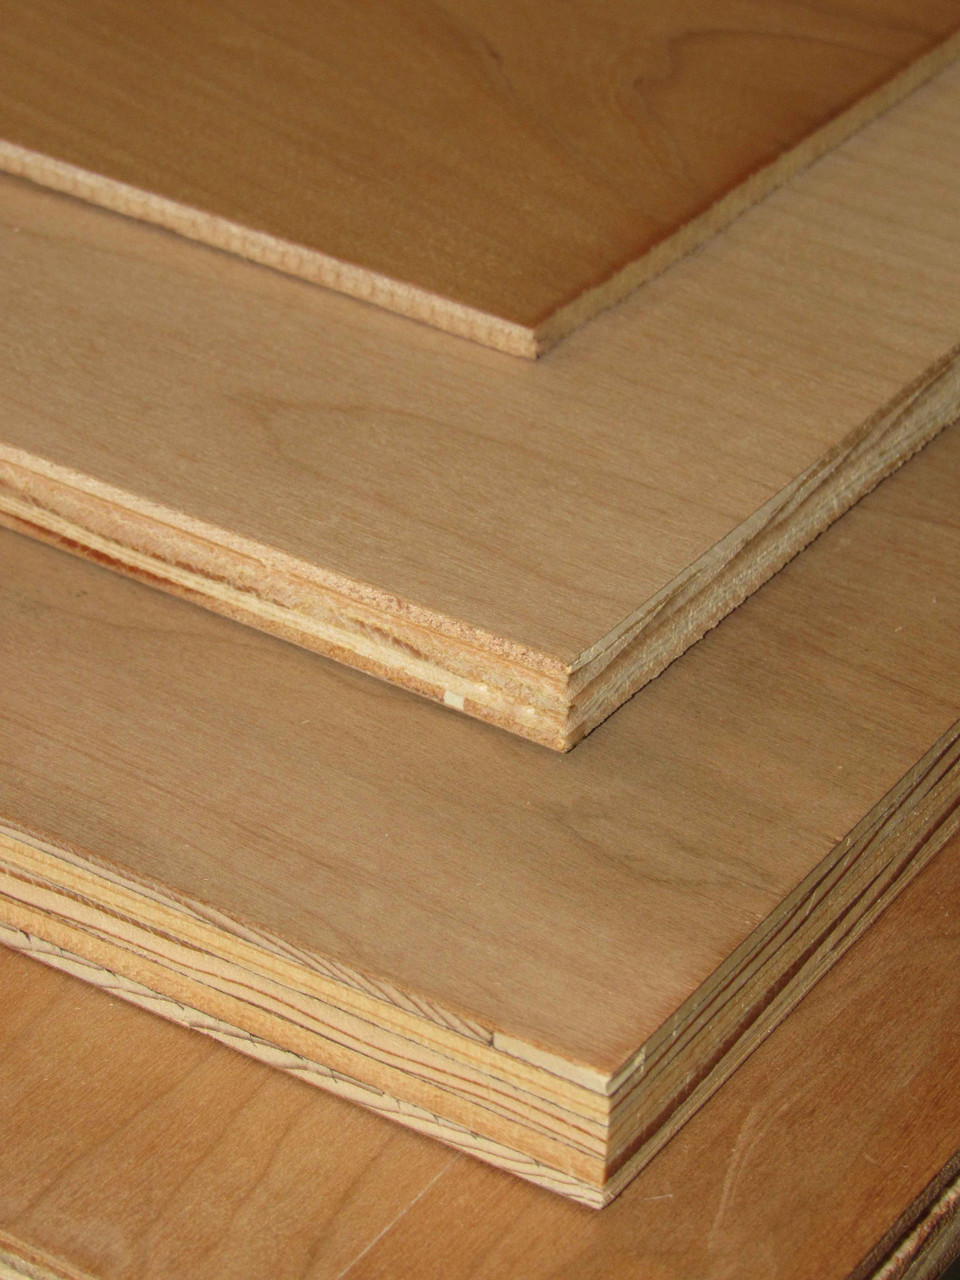 Luan Plywood 4x8 Sheets - Search Shopping